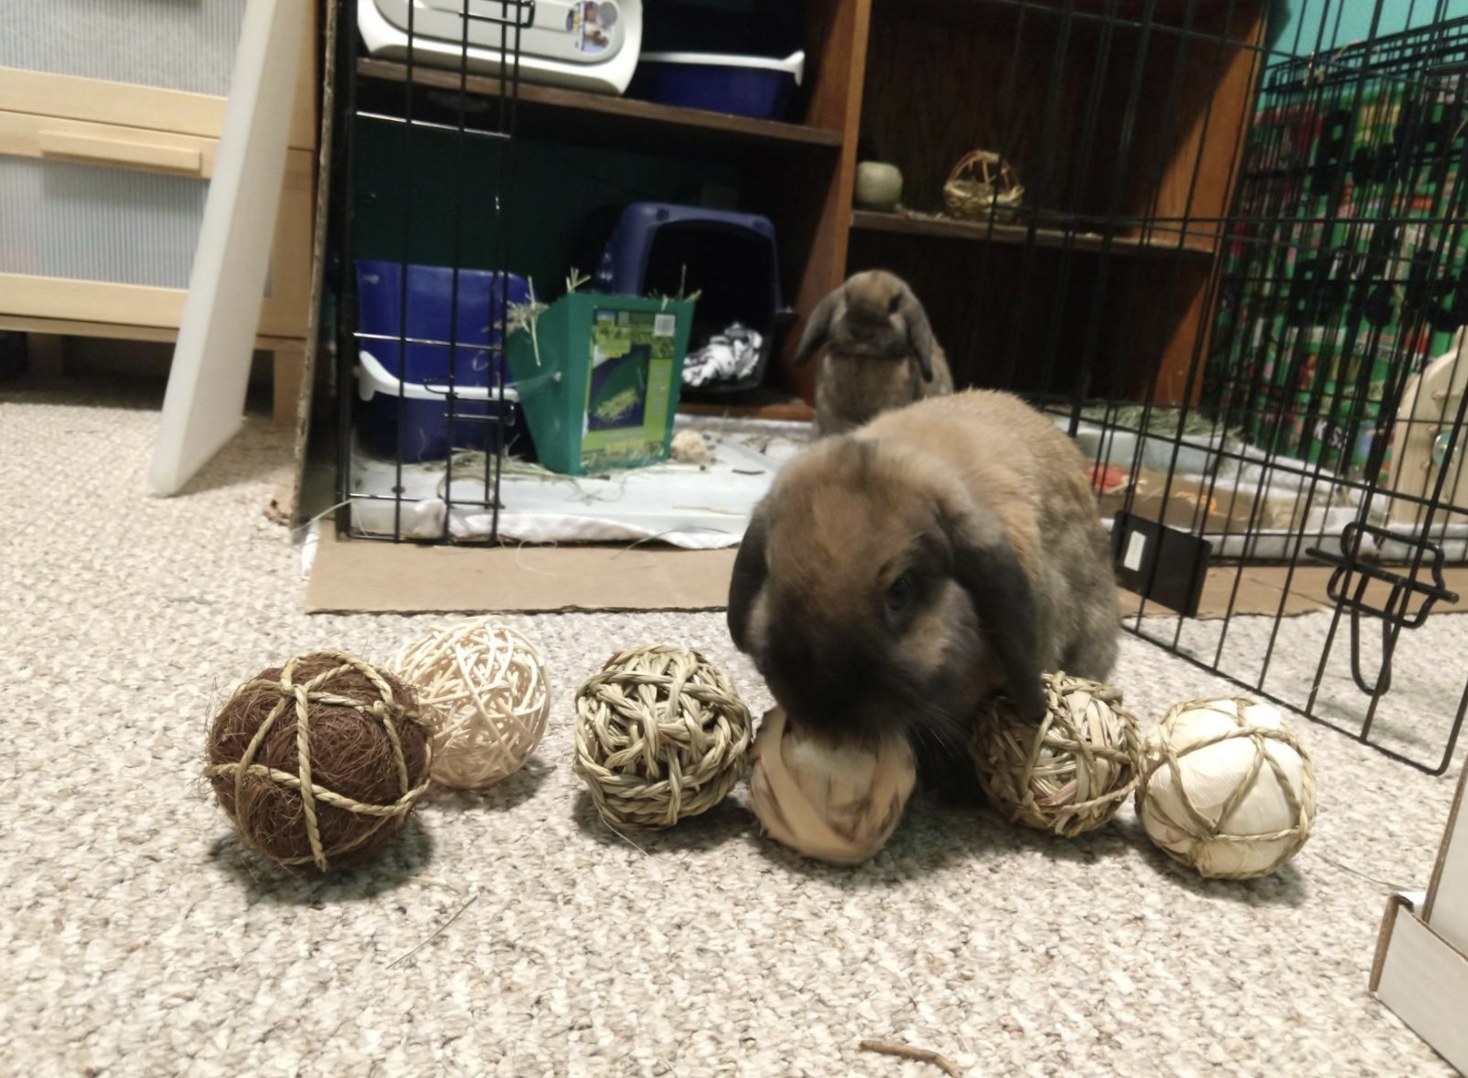 An image of a bunny on the floor playing with six rolling chew toy balls